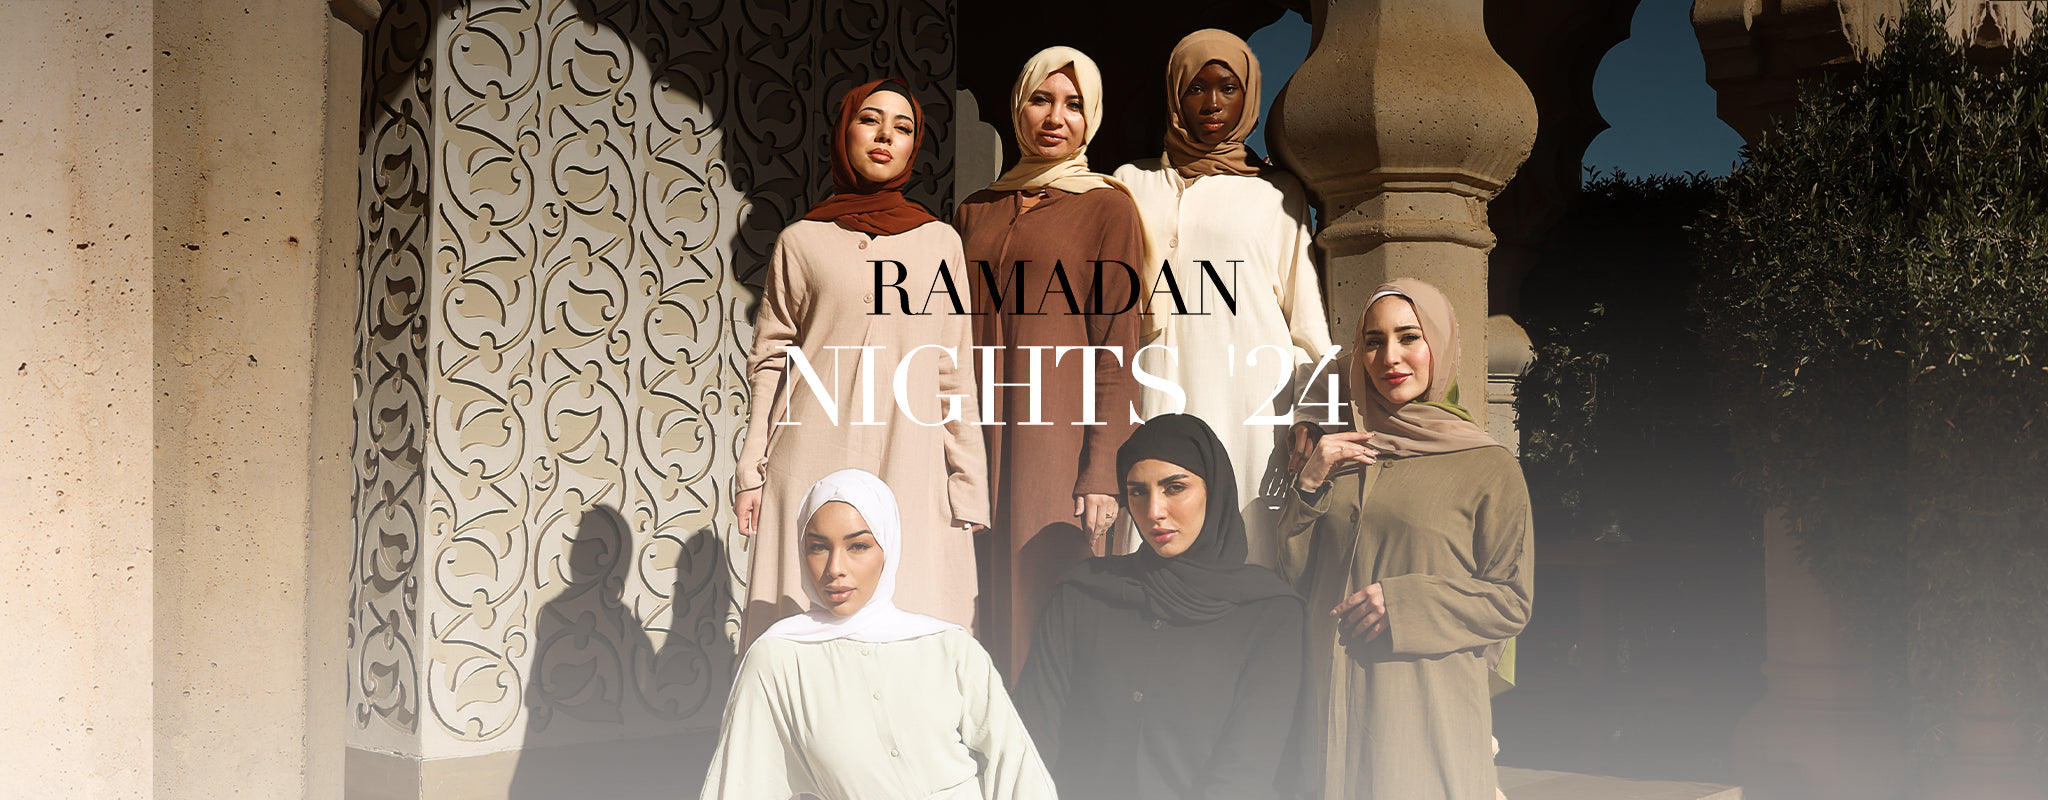 Modest Islamic Clothing, Abayas & Hijabs for Women